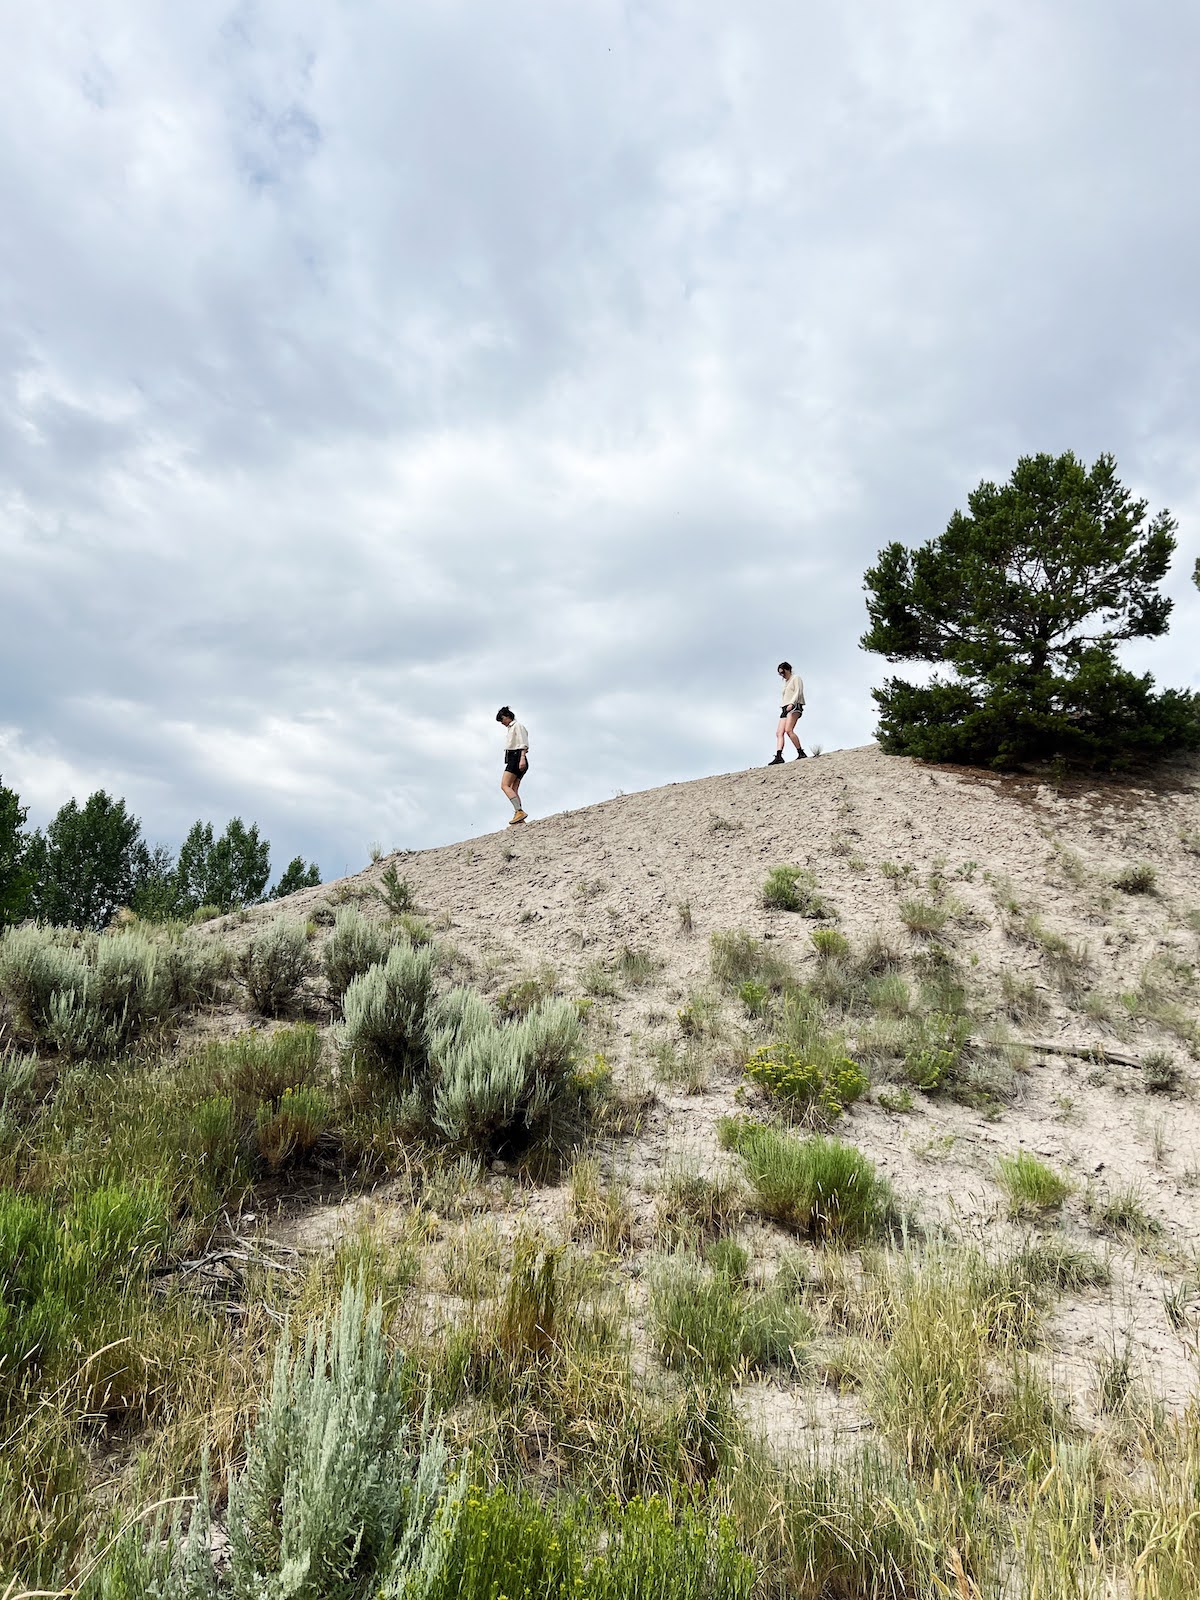 Two hikers descending a brush-filled hill